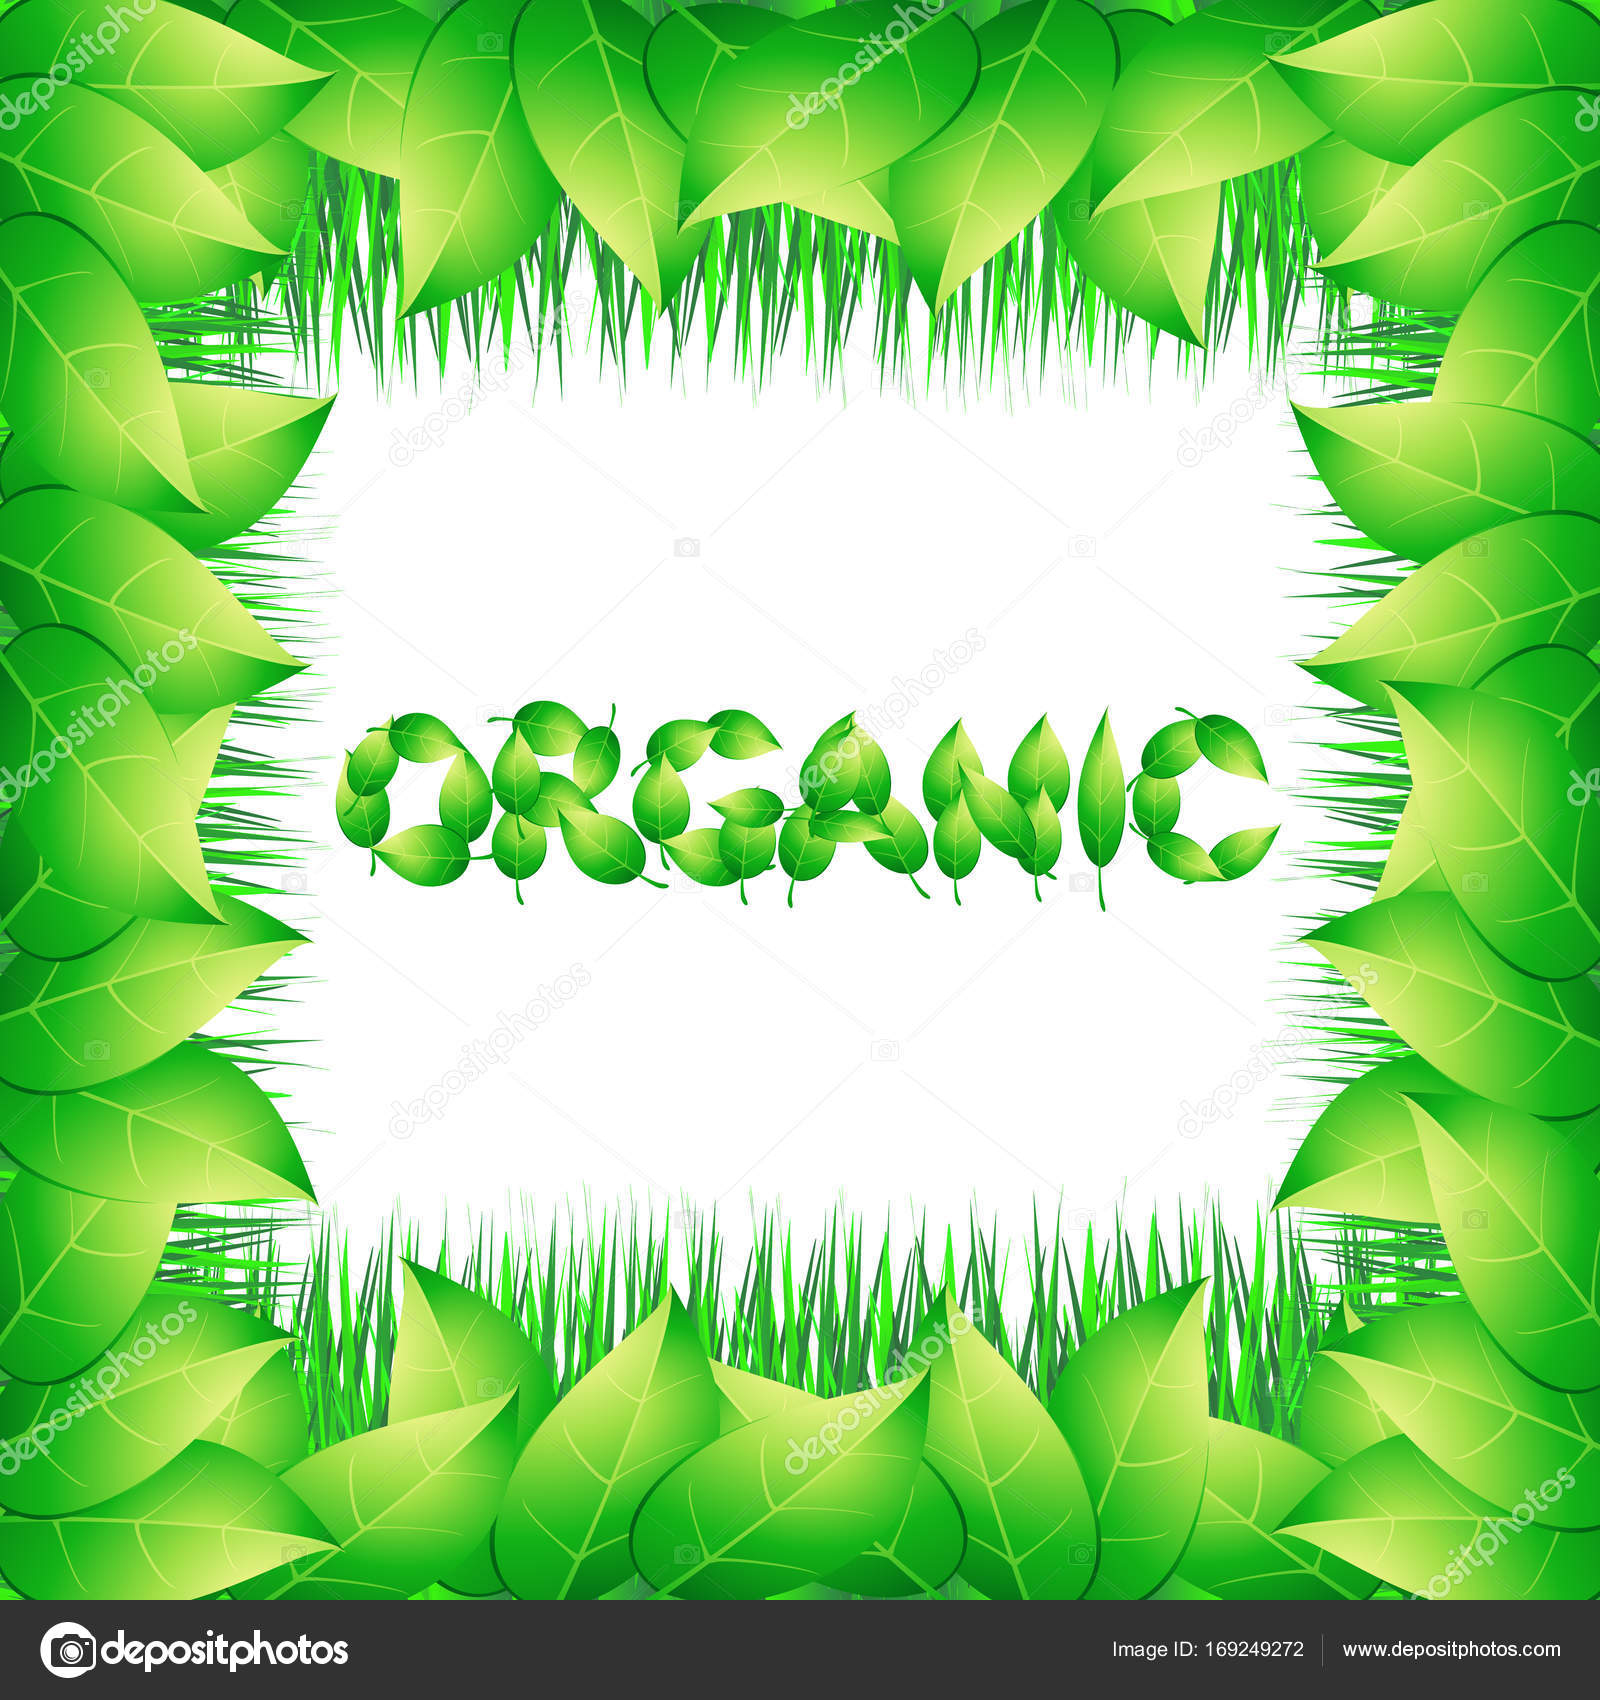 Organic background with green leaves. Bright illustration on the ...